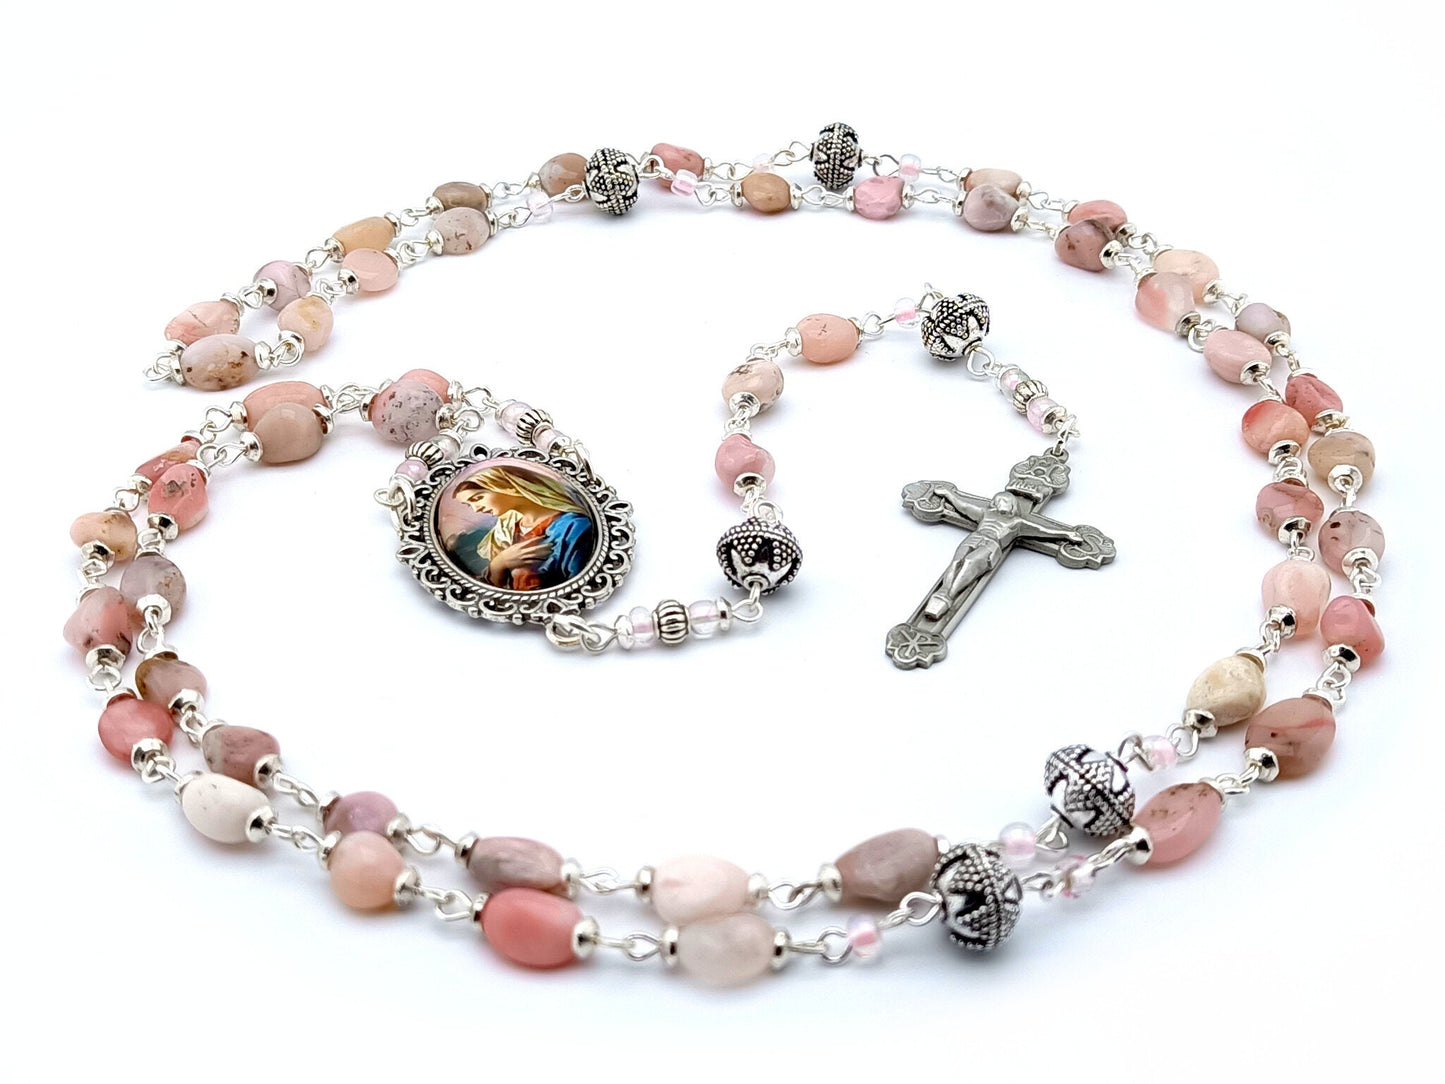 Our Lady's Fiat unique rosary beads with pink opal nugget beads, silver pater beads, crucifix and centre medal.